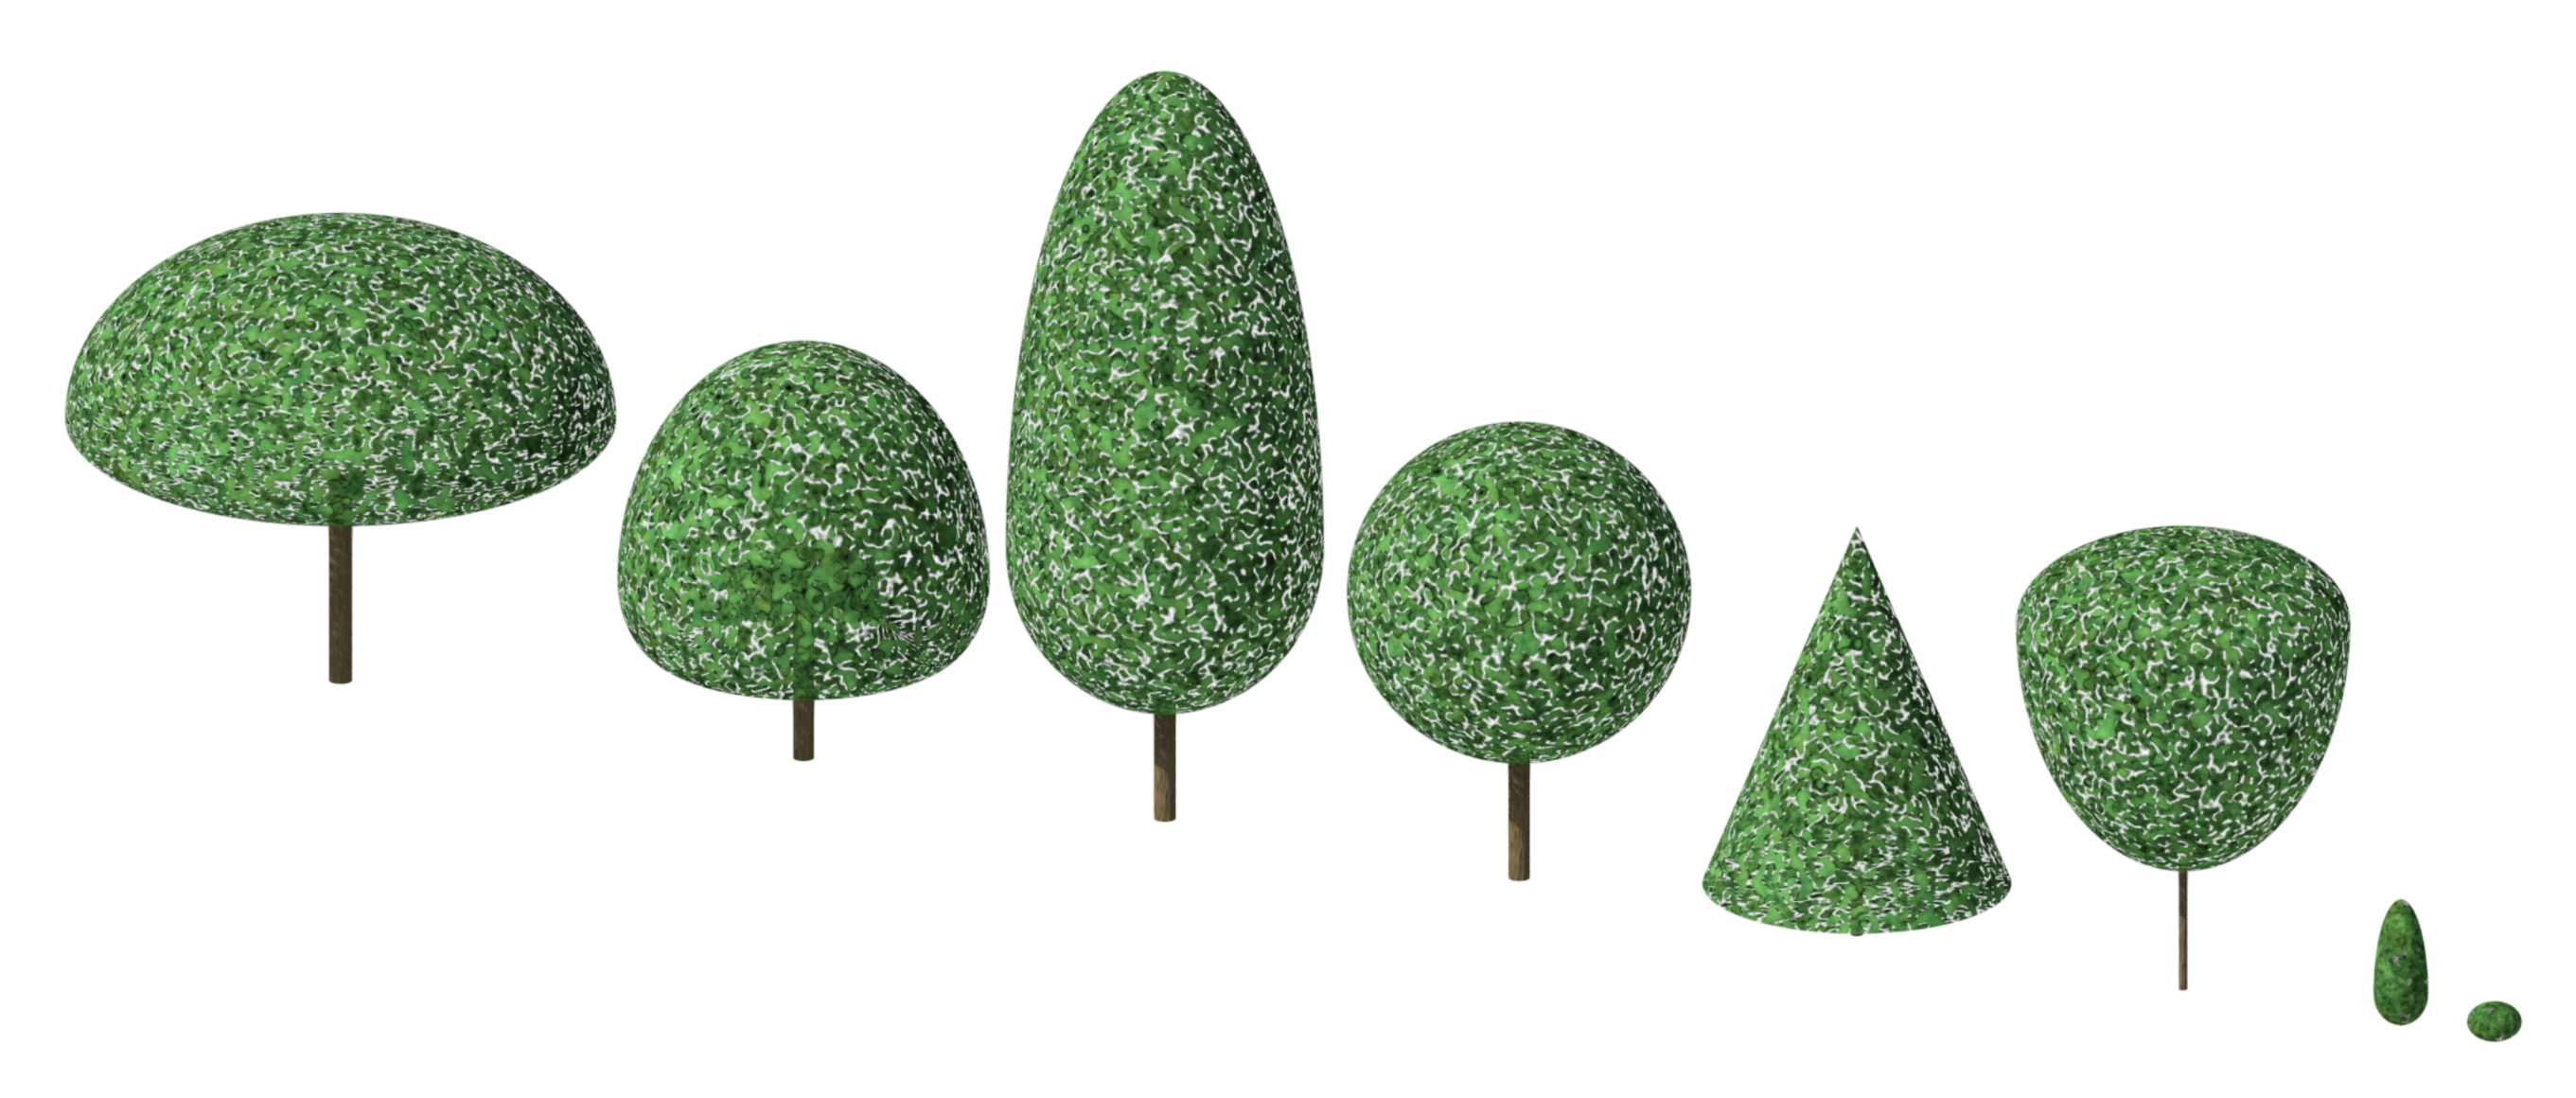 Revit Raytrace showing our custom foliage material in for columnar, weeping, round, pyramidal, umbrella and vase-shaped trees.